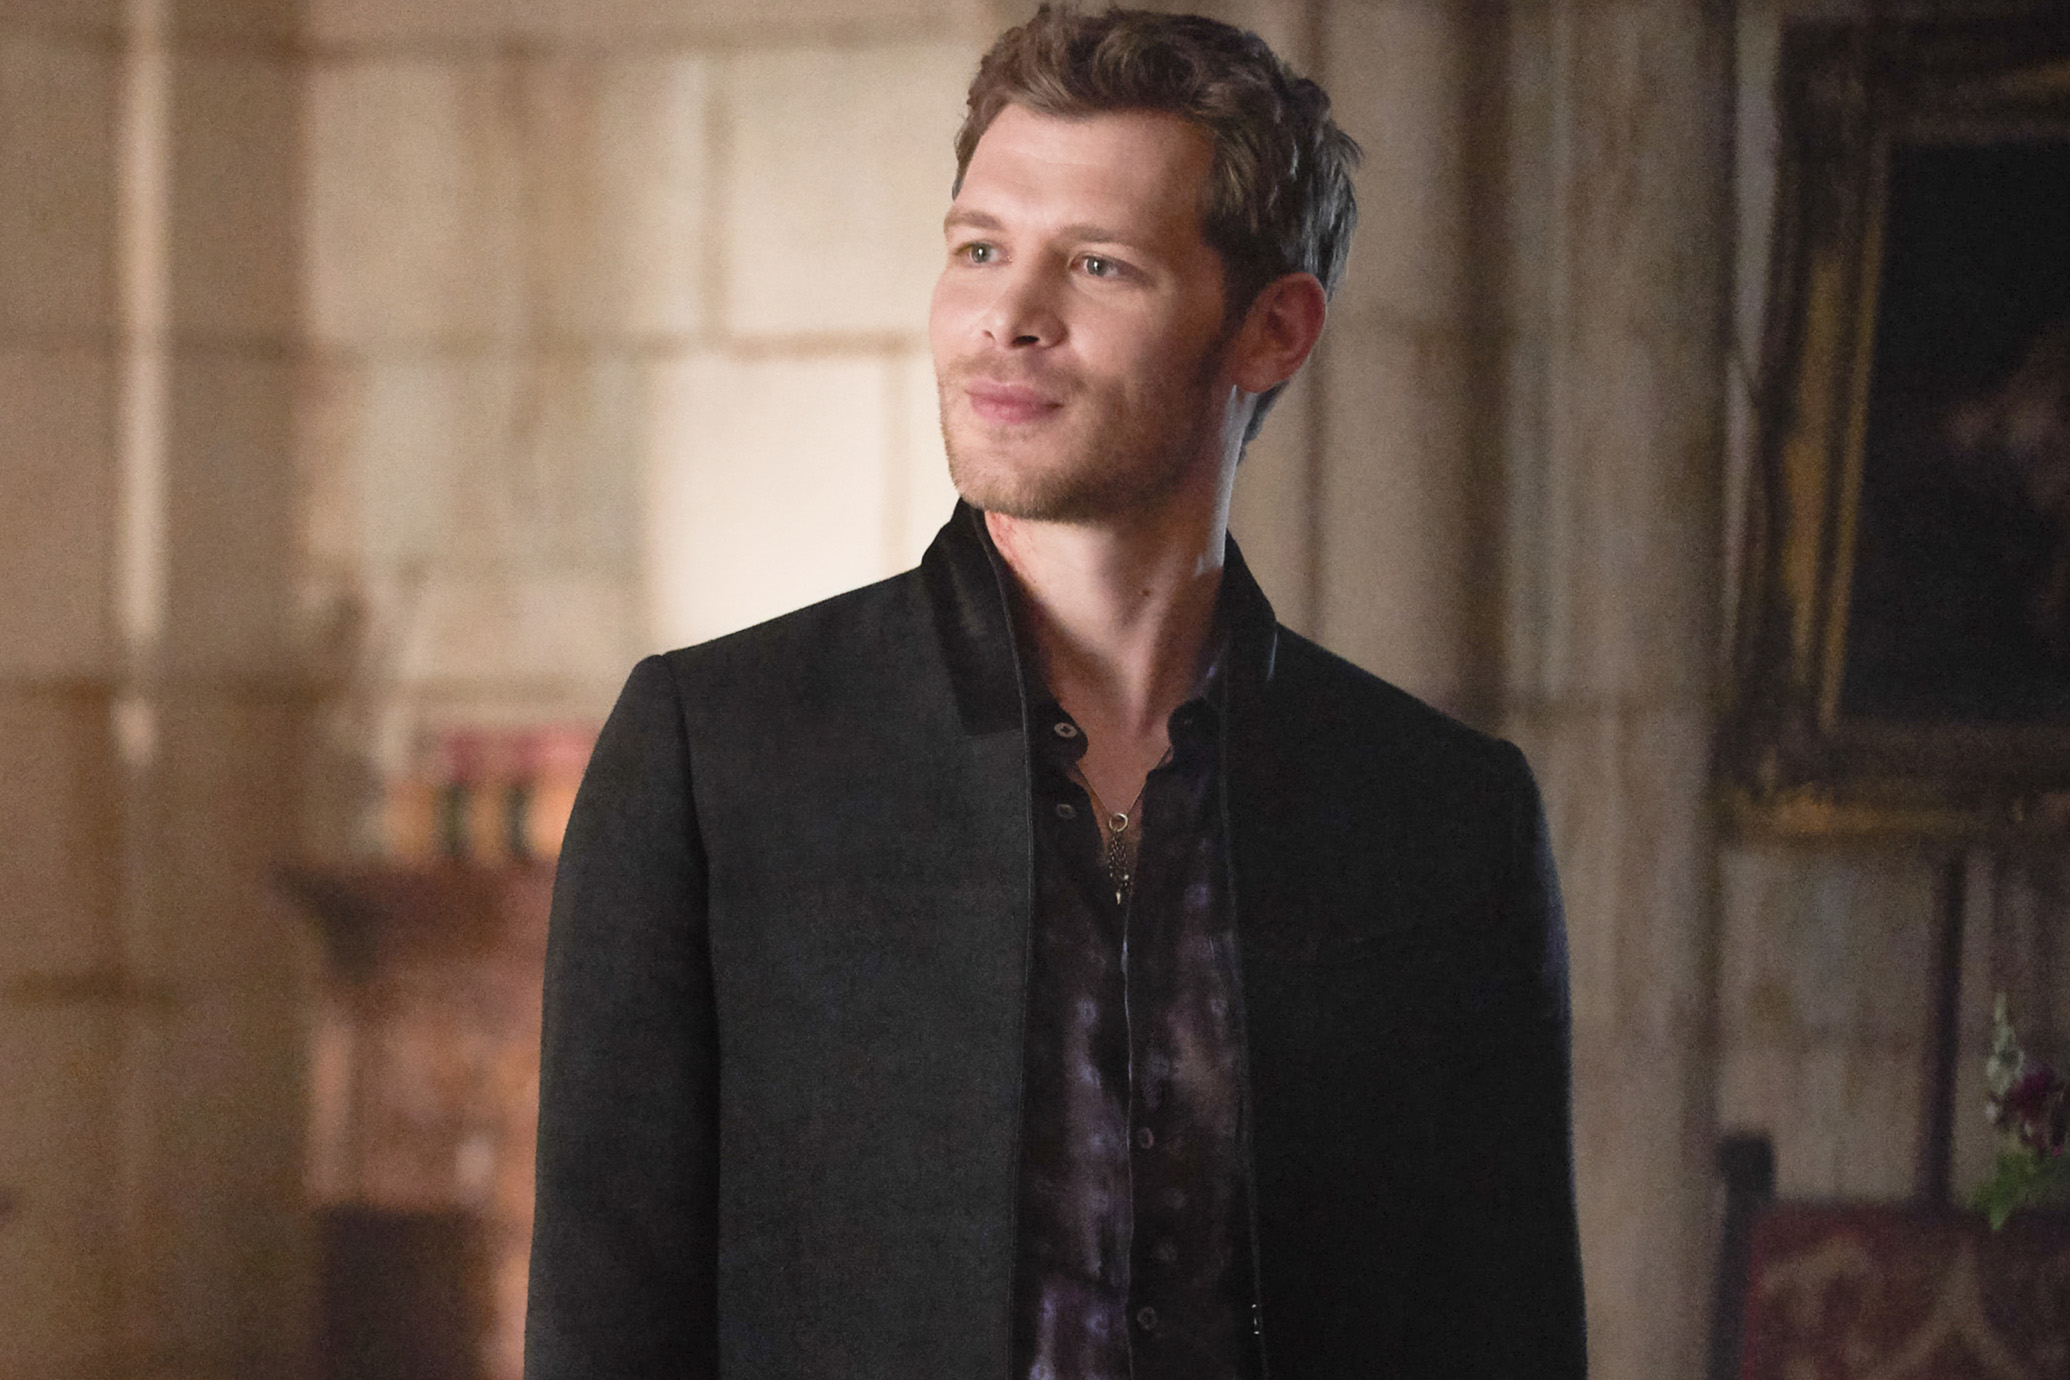 Joseph Morgan in a black blazer over a patterned shirt, smiling on the TV show set